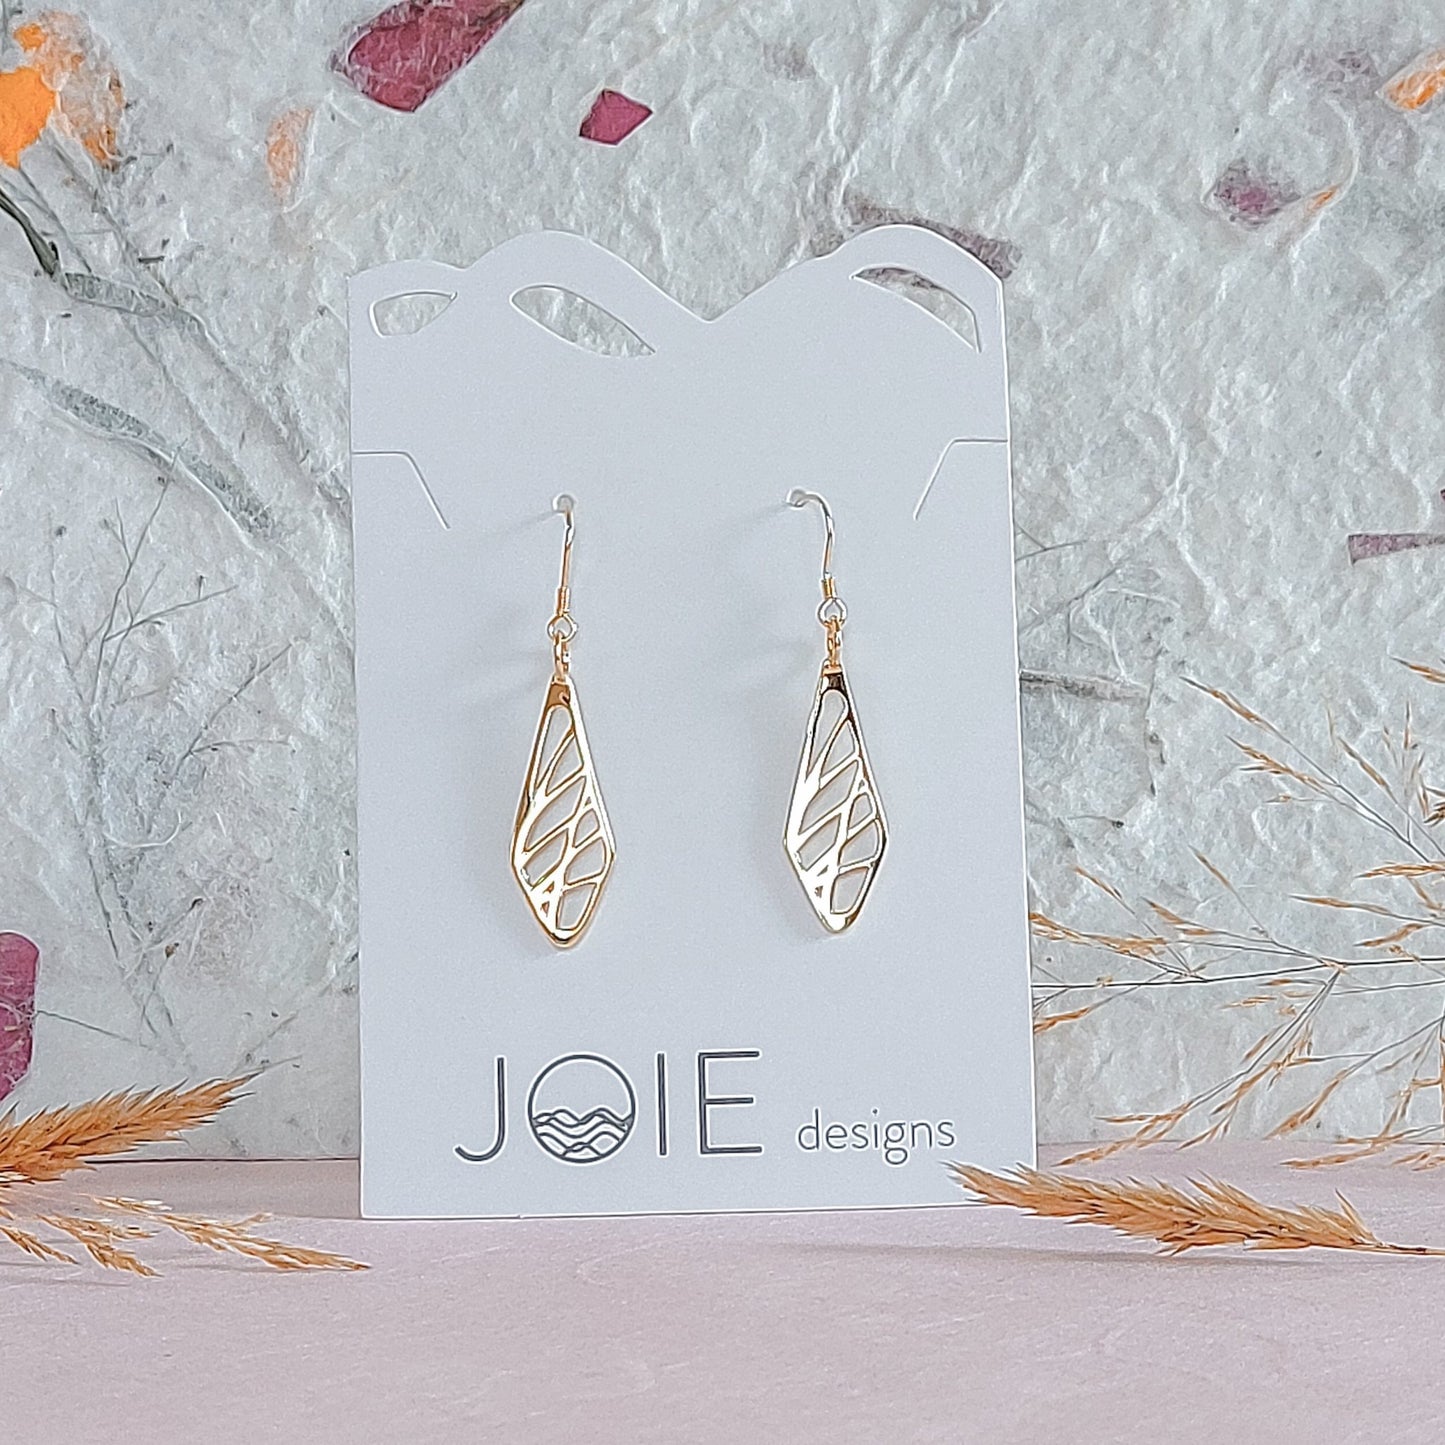 18k plated gold diamond shaped sweet grass earrings on white jewelry card with wildflowers paper background